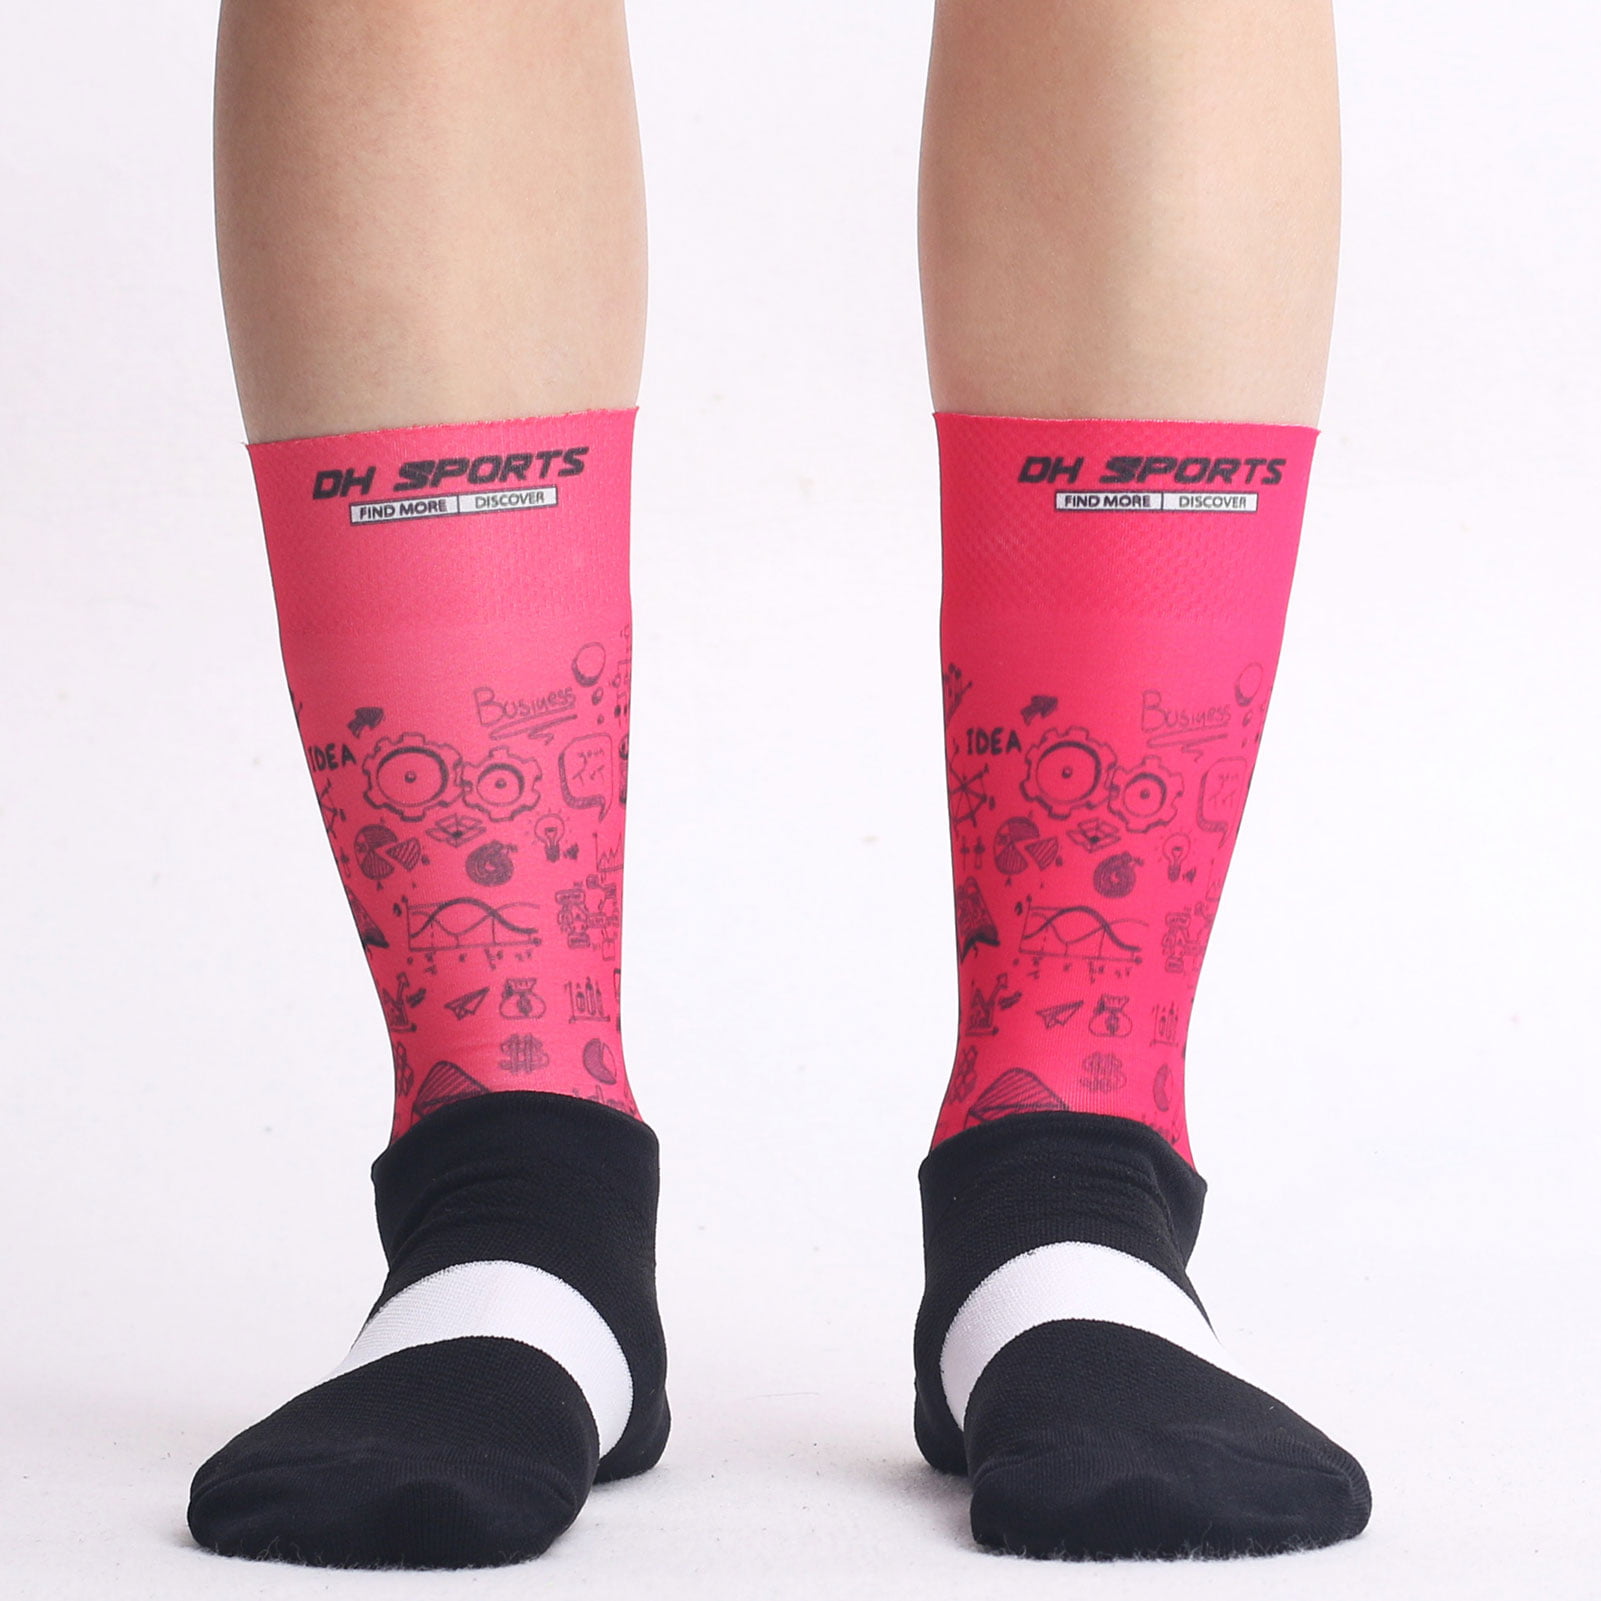 New style cycling socks for summer,pink size 6-12 2  working days delivery. 